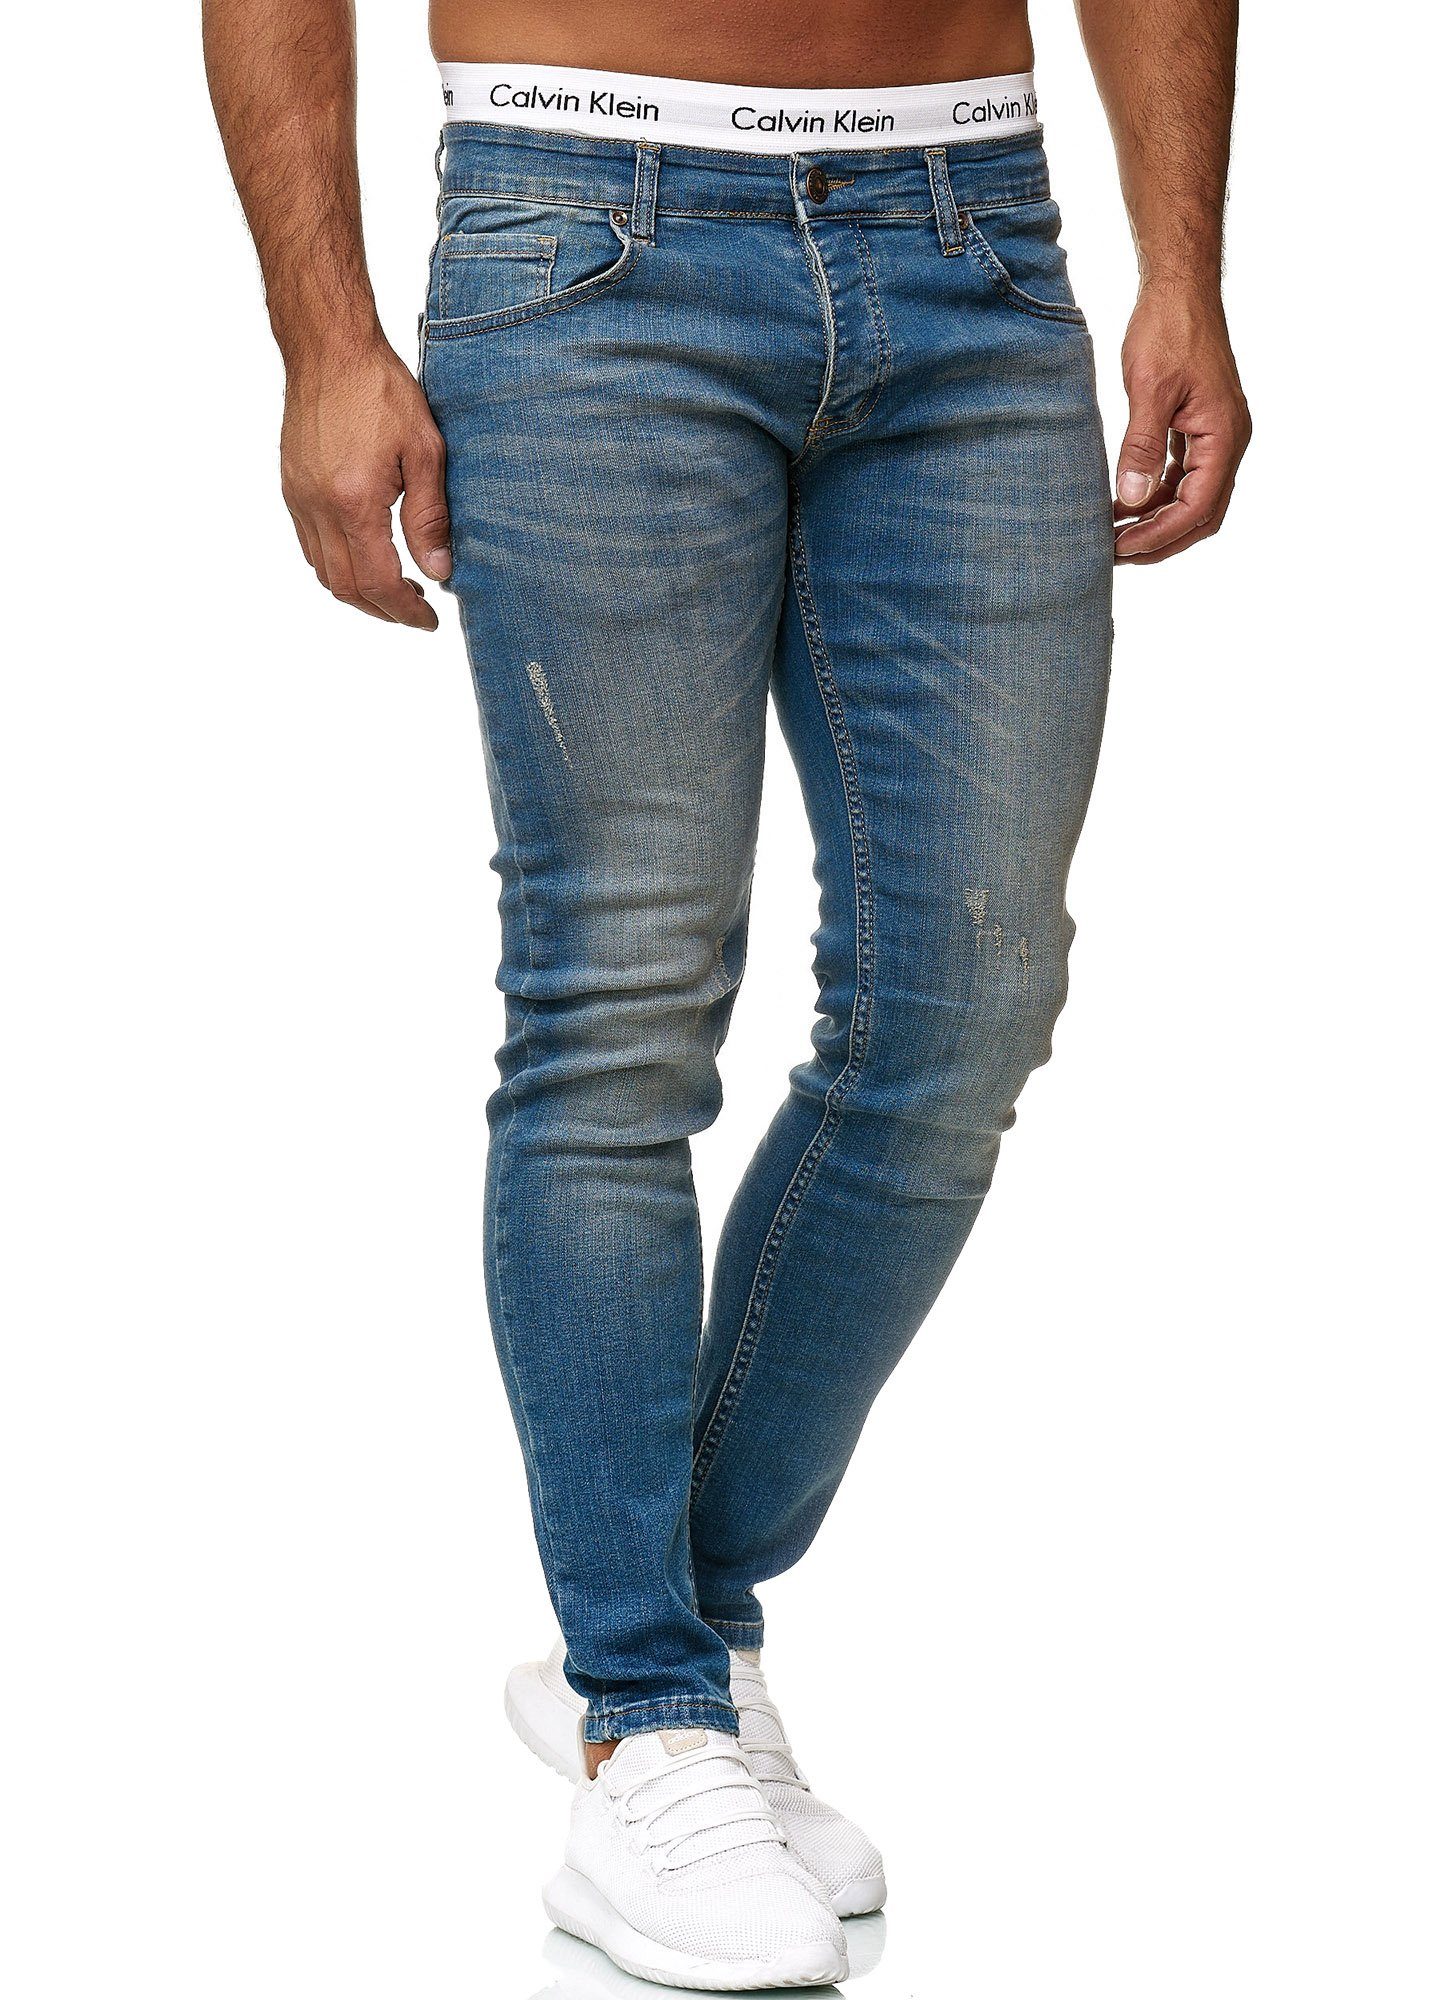 1-tlg) 600JS Straight-Jeans Used Blue Casual Bootcut, Designerjeans (Jeanshose Dirty Freizeit OneRedox Business 613